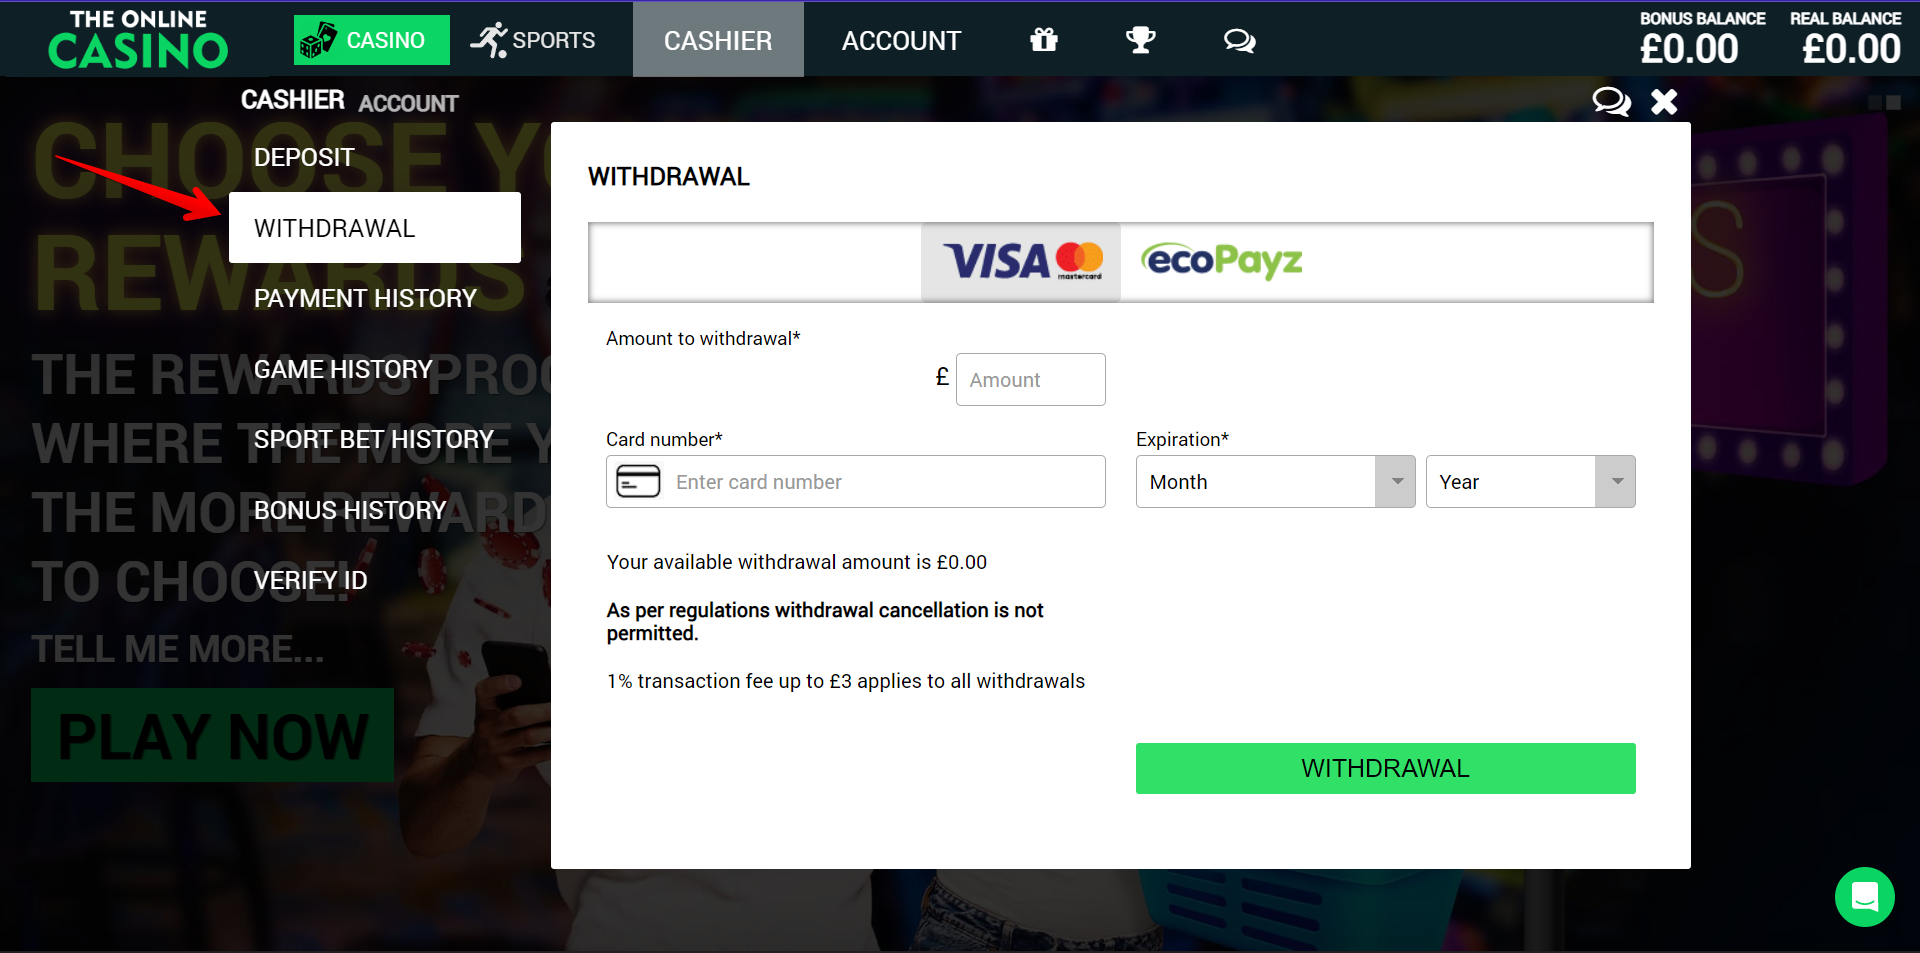 Click on Withdrawal